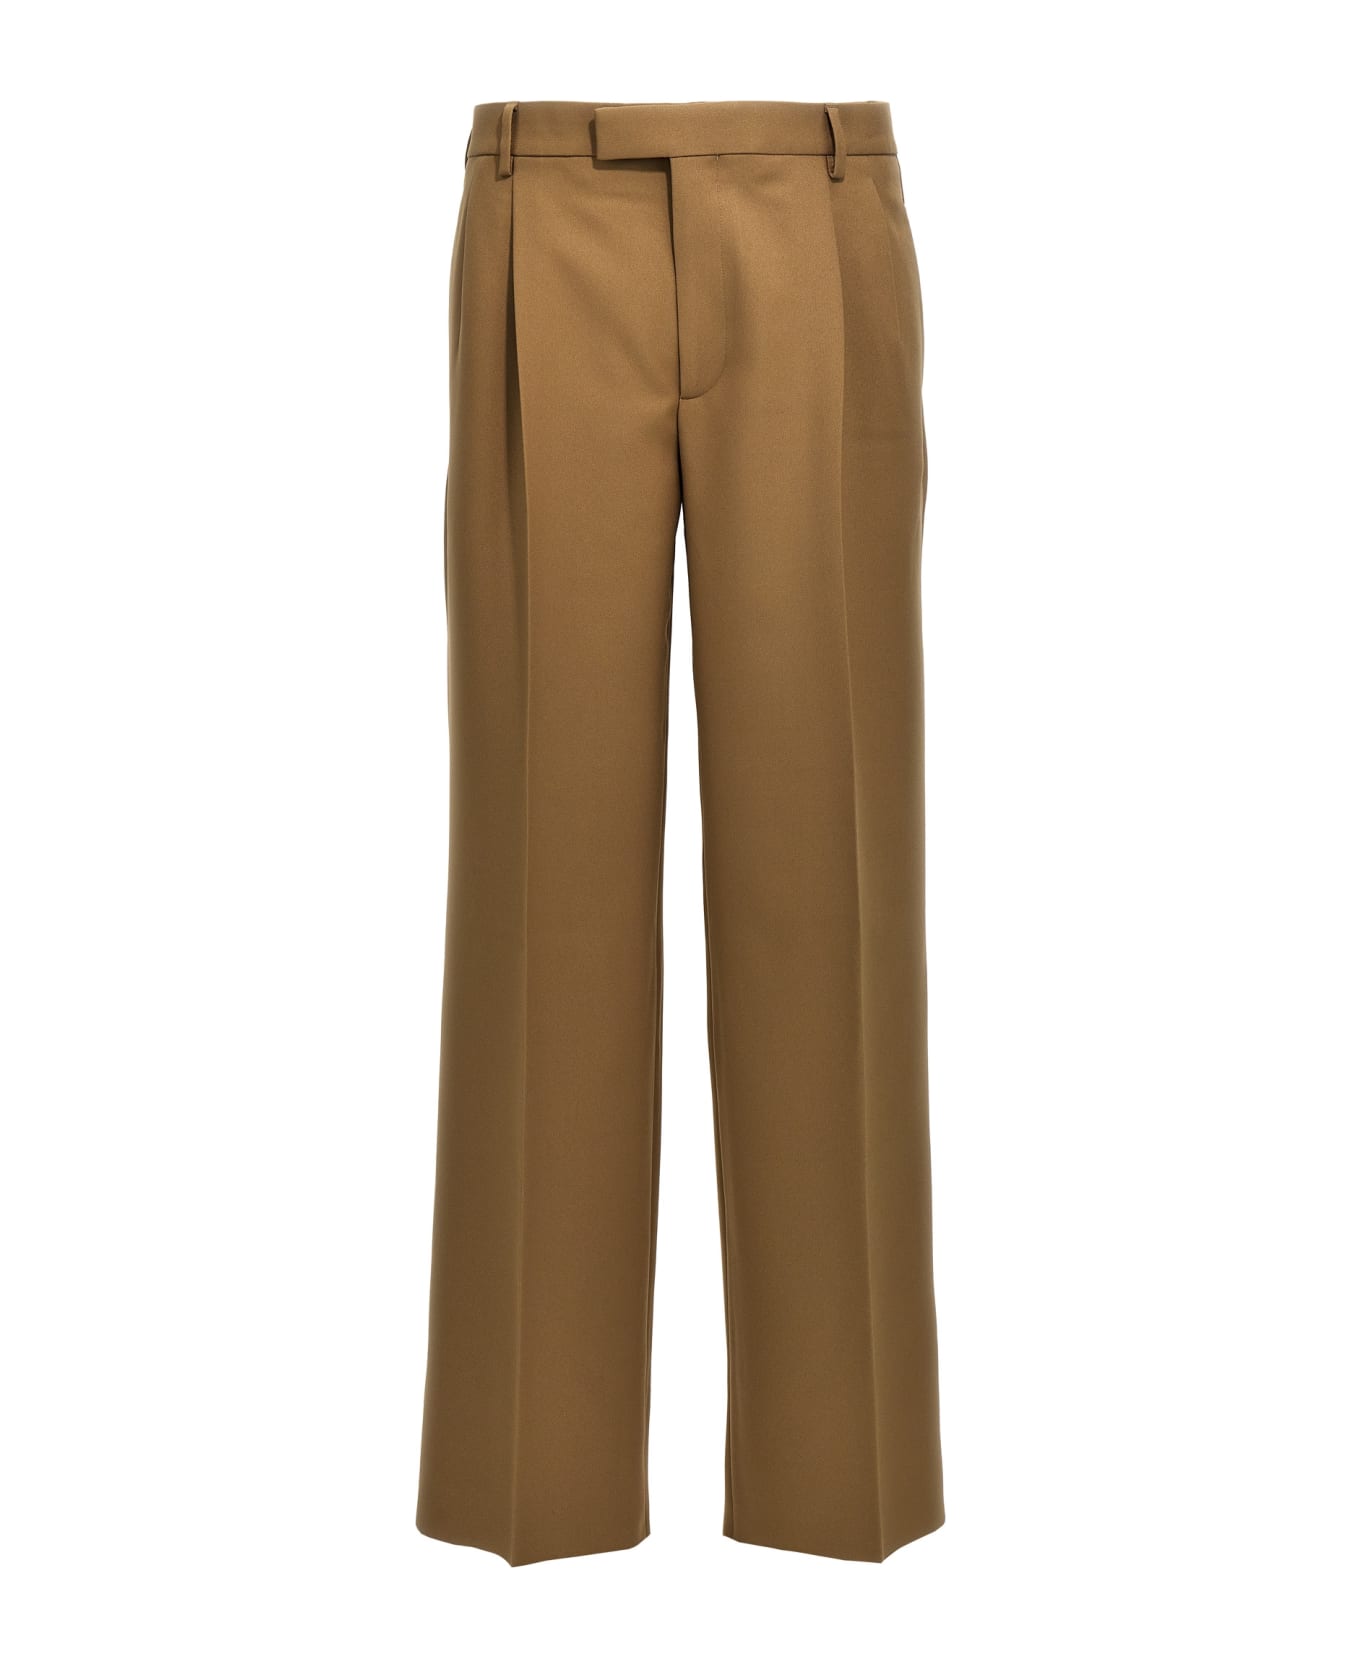 Gucci Pleat-front Trousers - Beige ボトムス